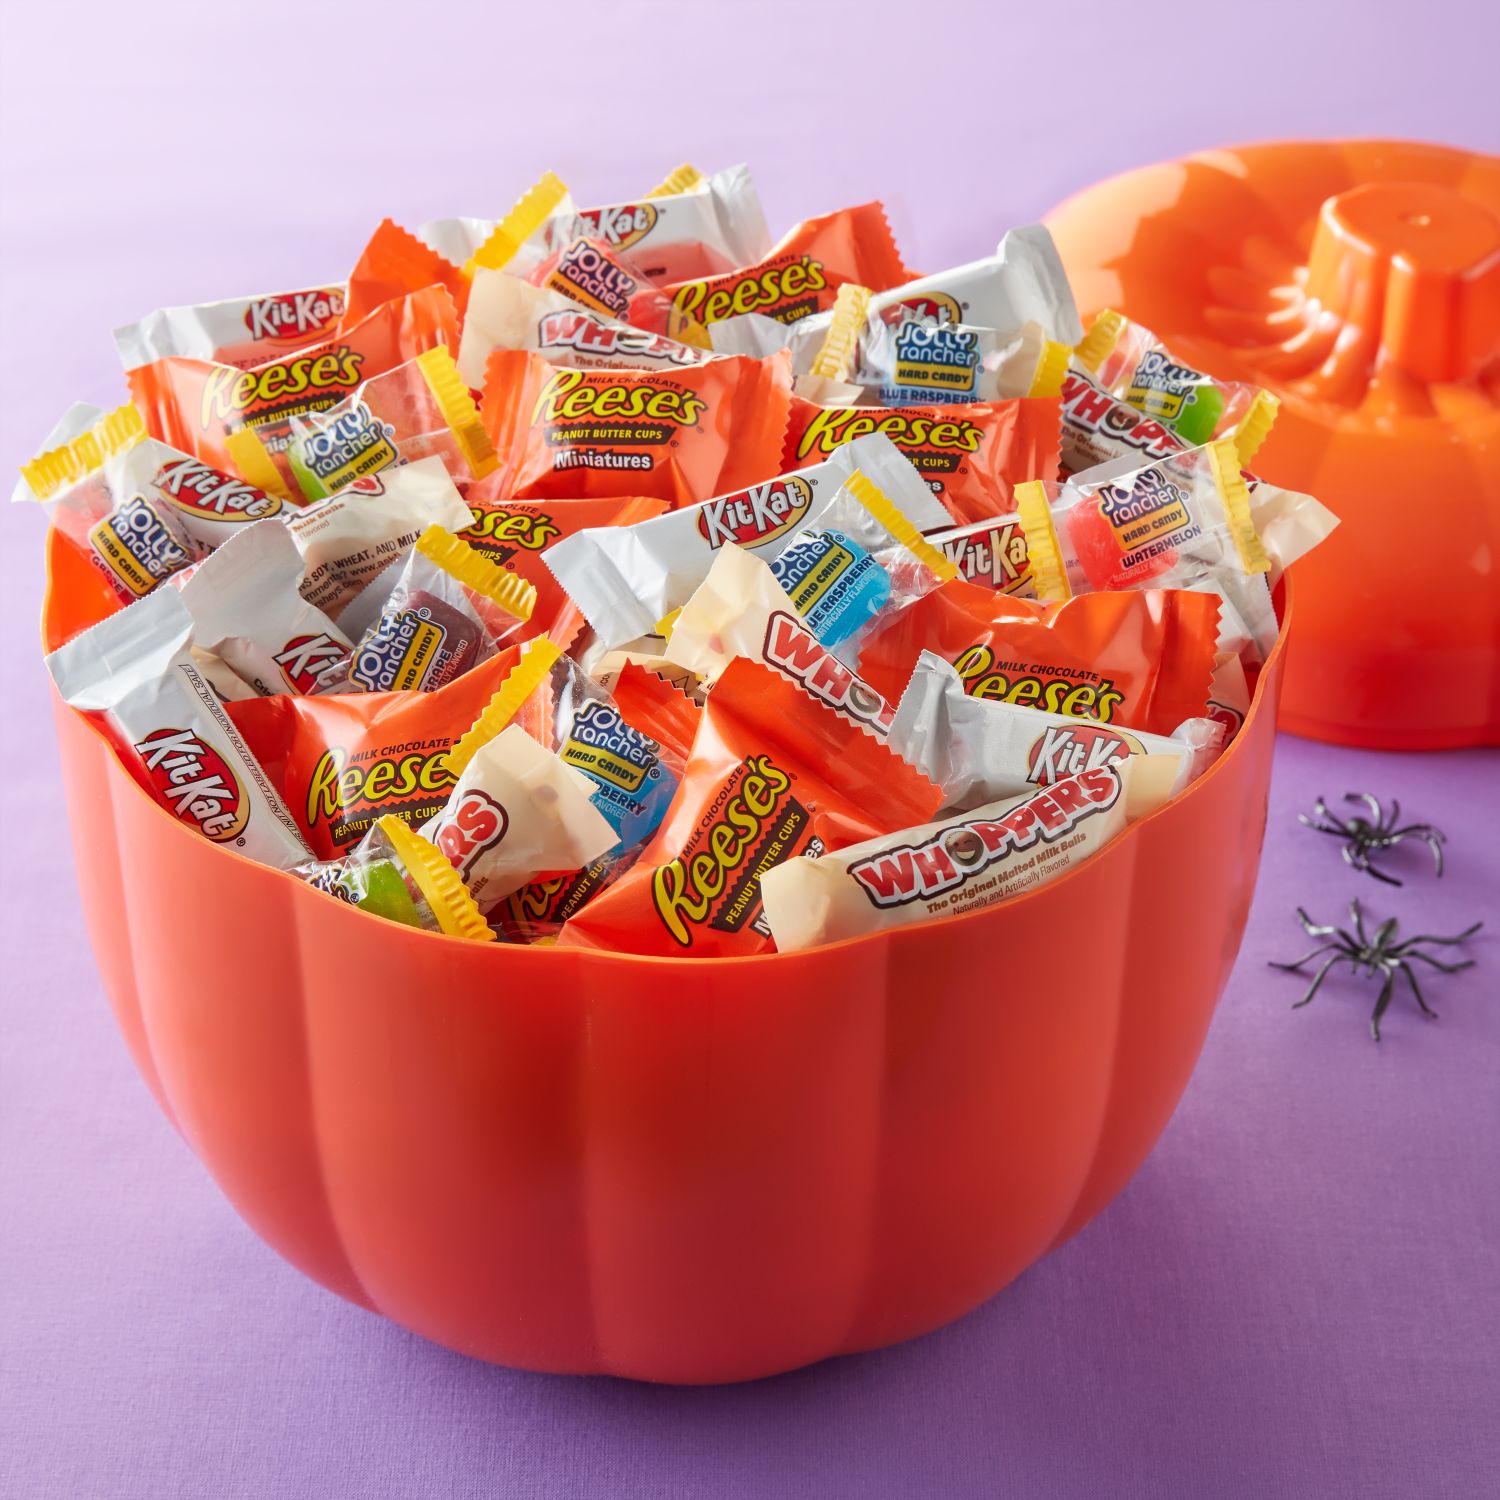 Hershey, Miniatures Halloween Assortment Chocolate, White Creme and Sweets Assortment Candy, Halloween, 37.4 oz, Plastic Pumpkin Candy Bowl (160 Pieces) - image 5 of 6